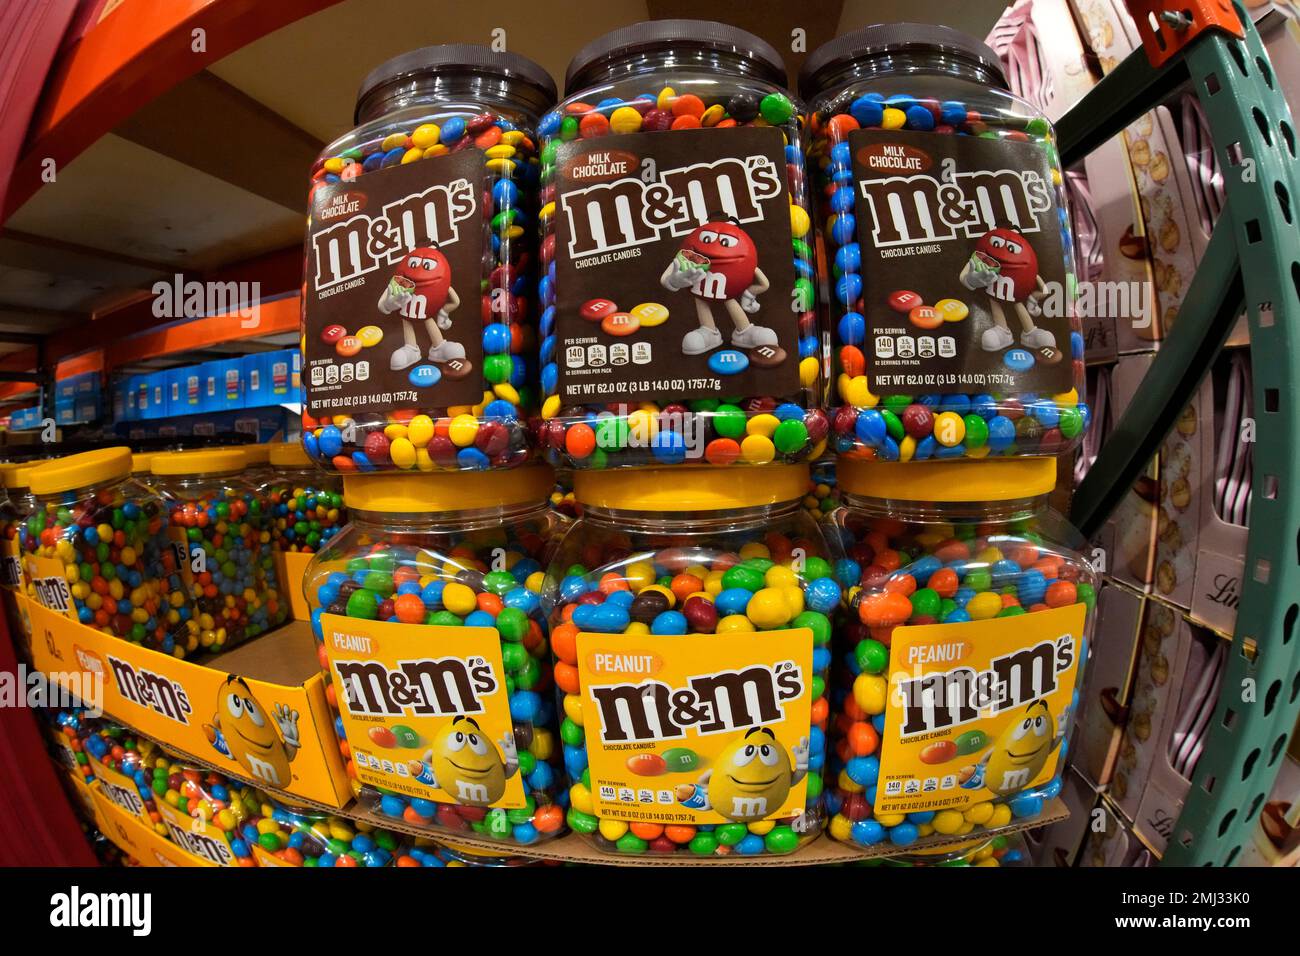 This is a display of M&M's on display in a Costco Warehouse in